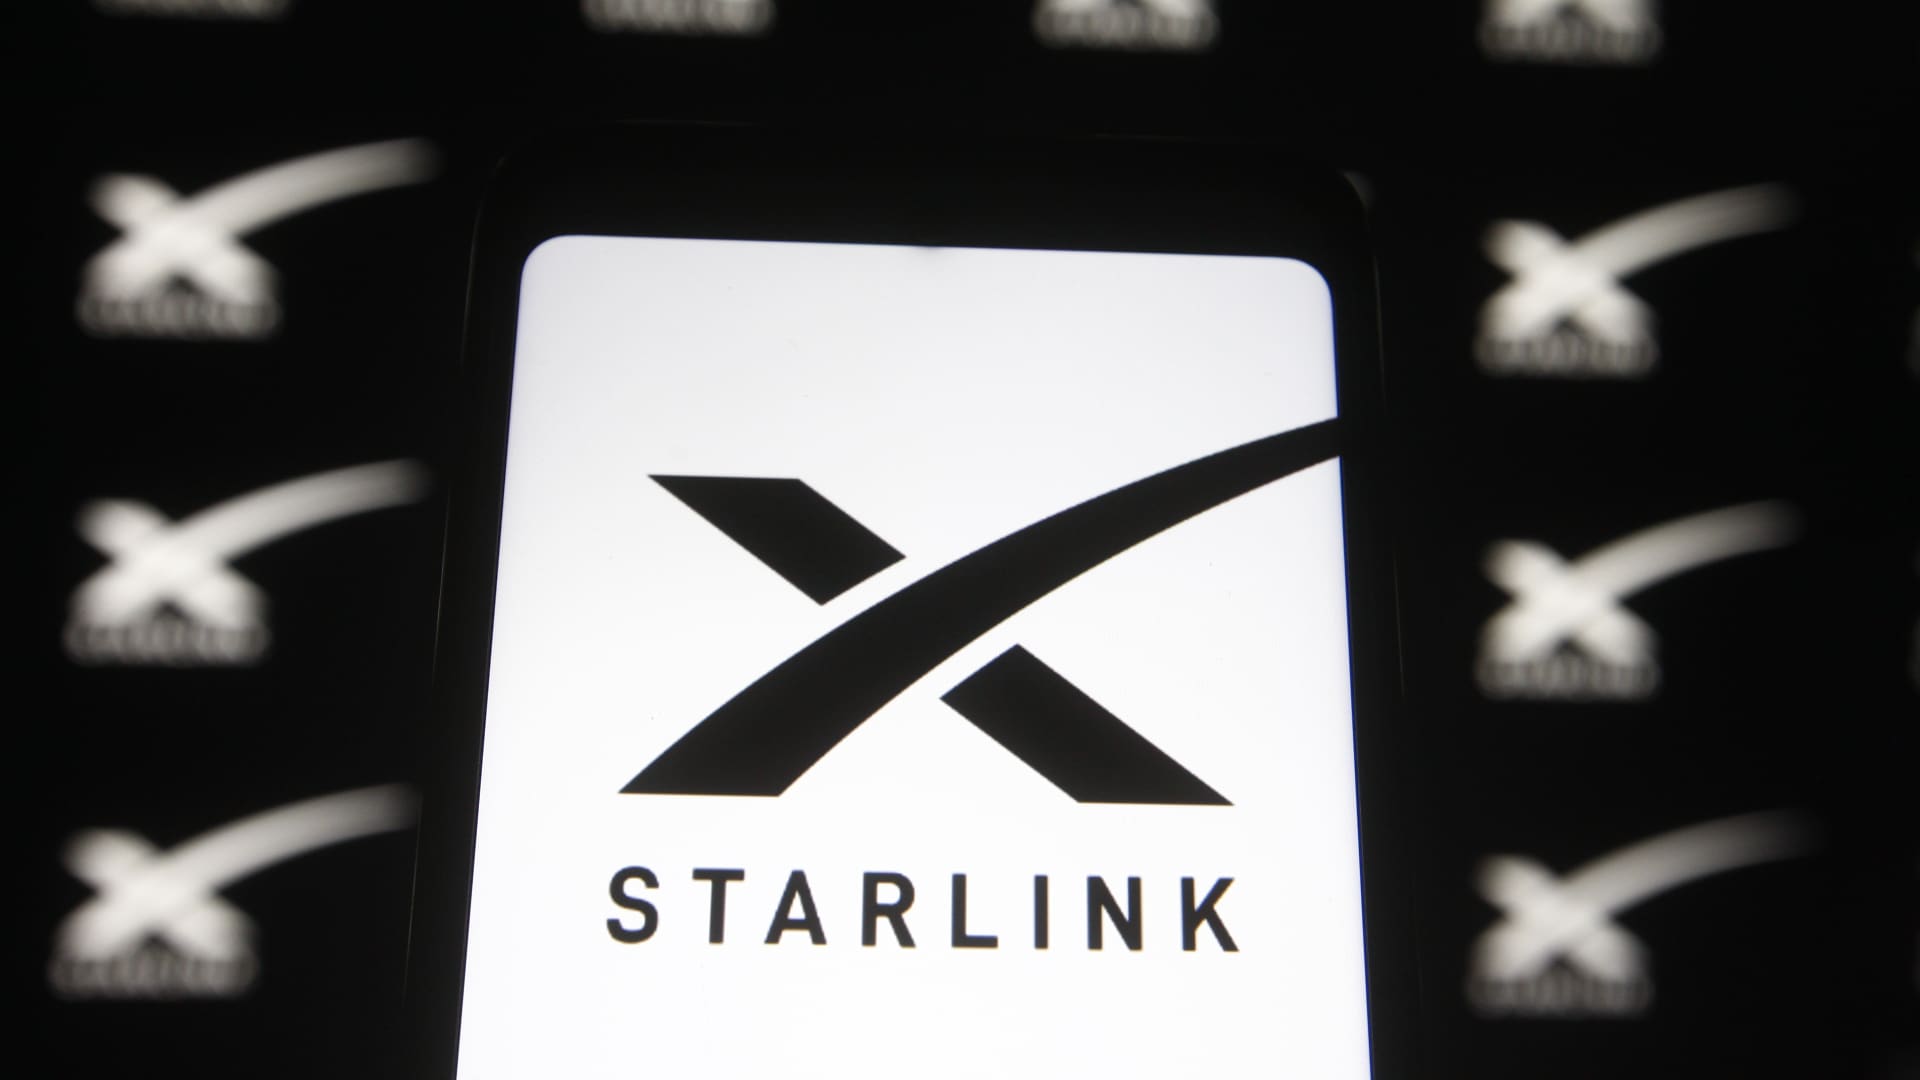 A Starlink logo of a satellite internet constellation being constructed by SpaceX is seen on a smartphone and a pc screen.